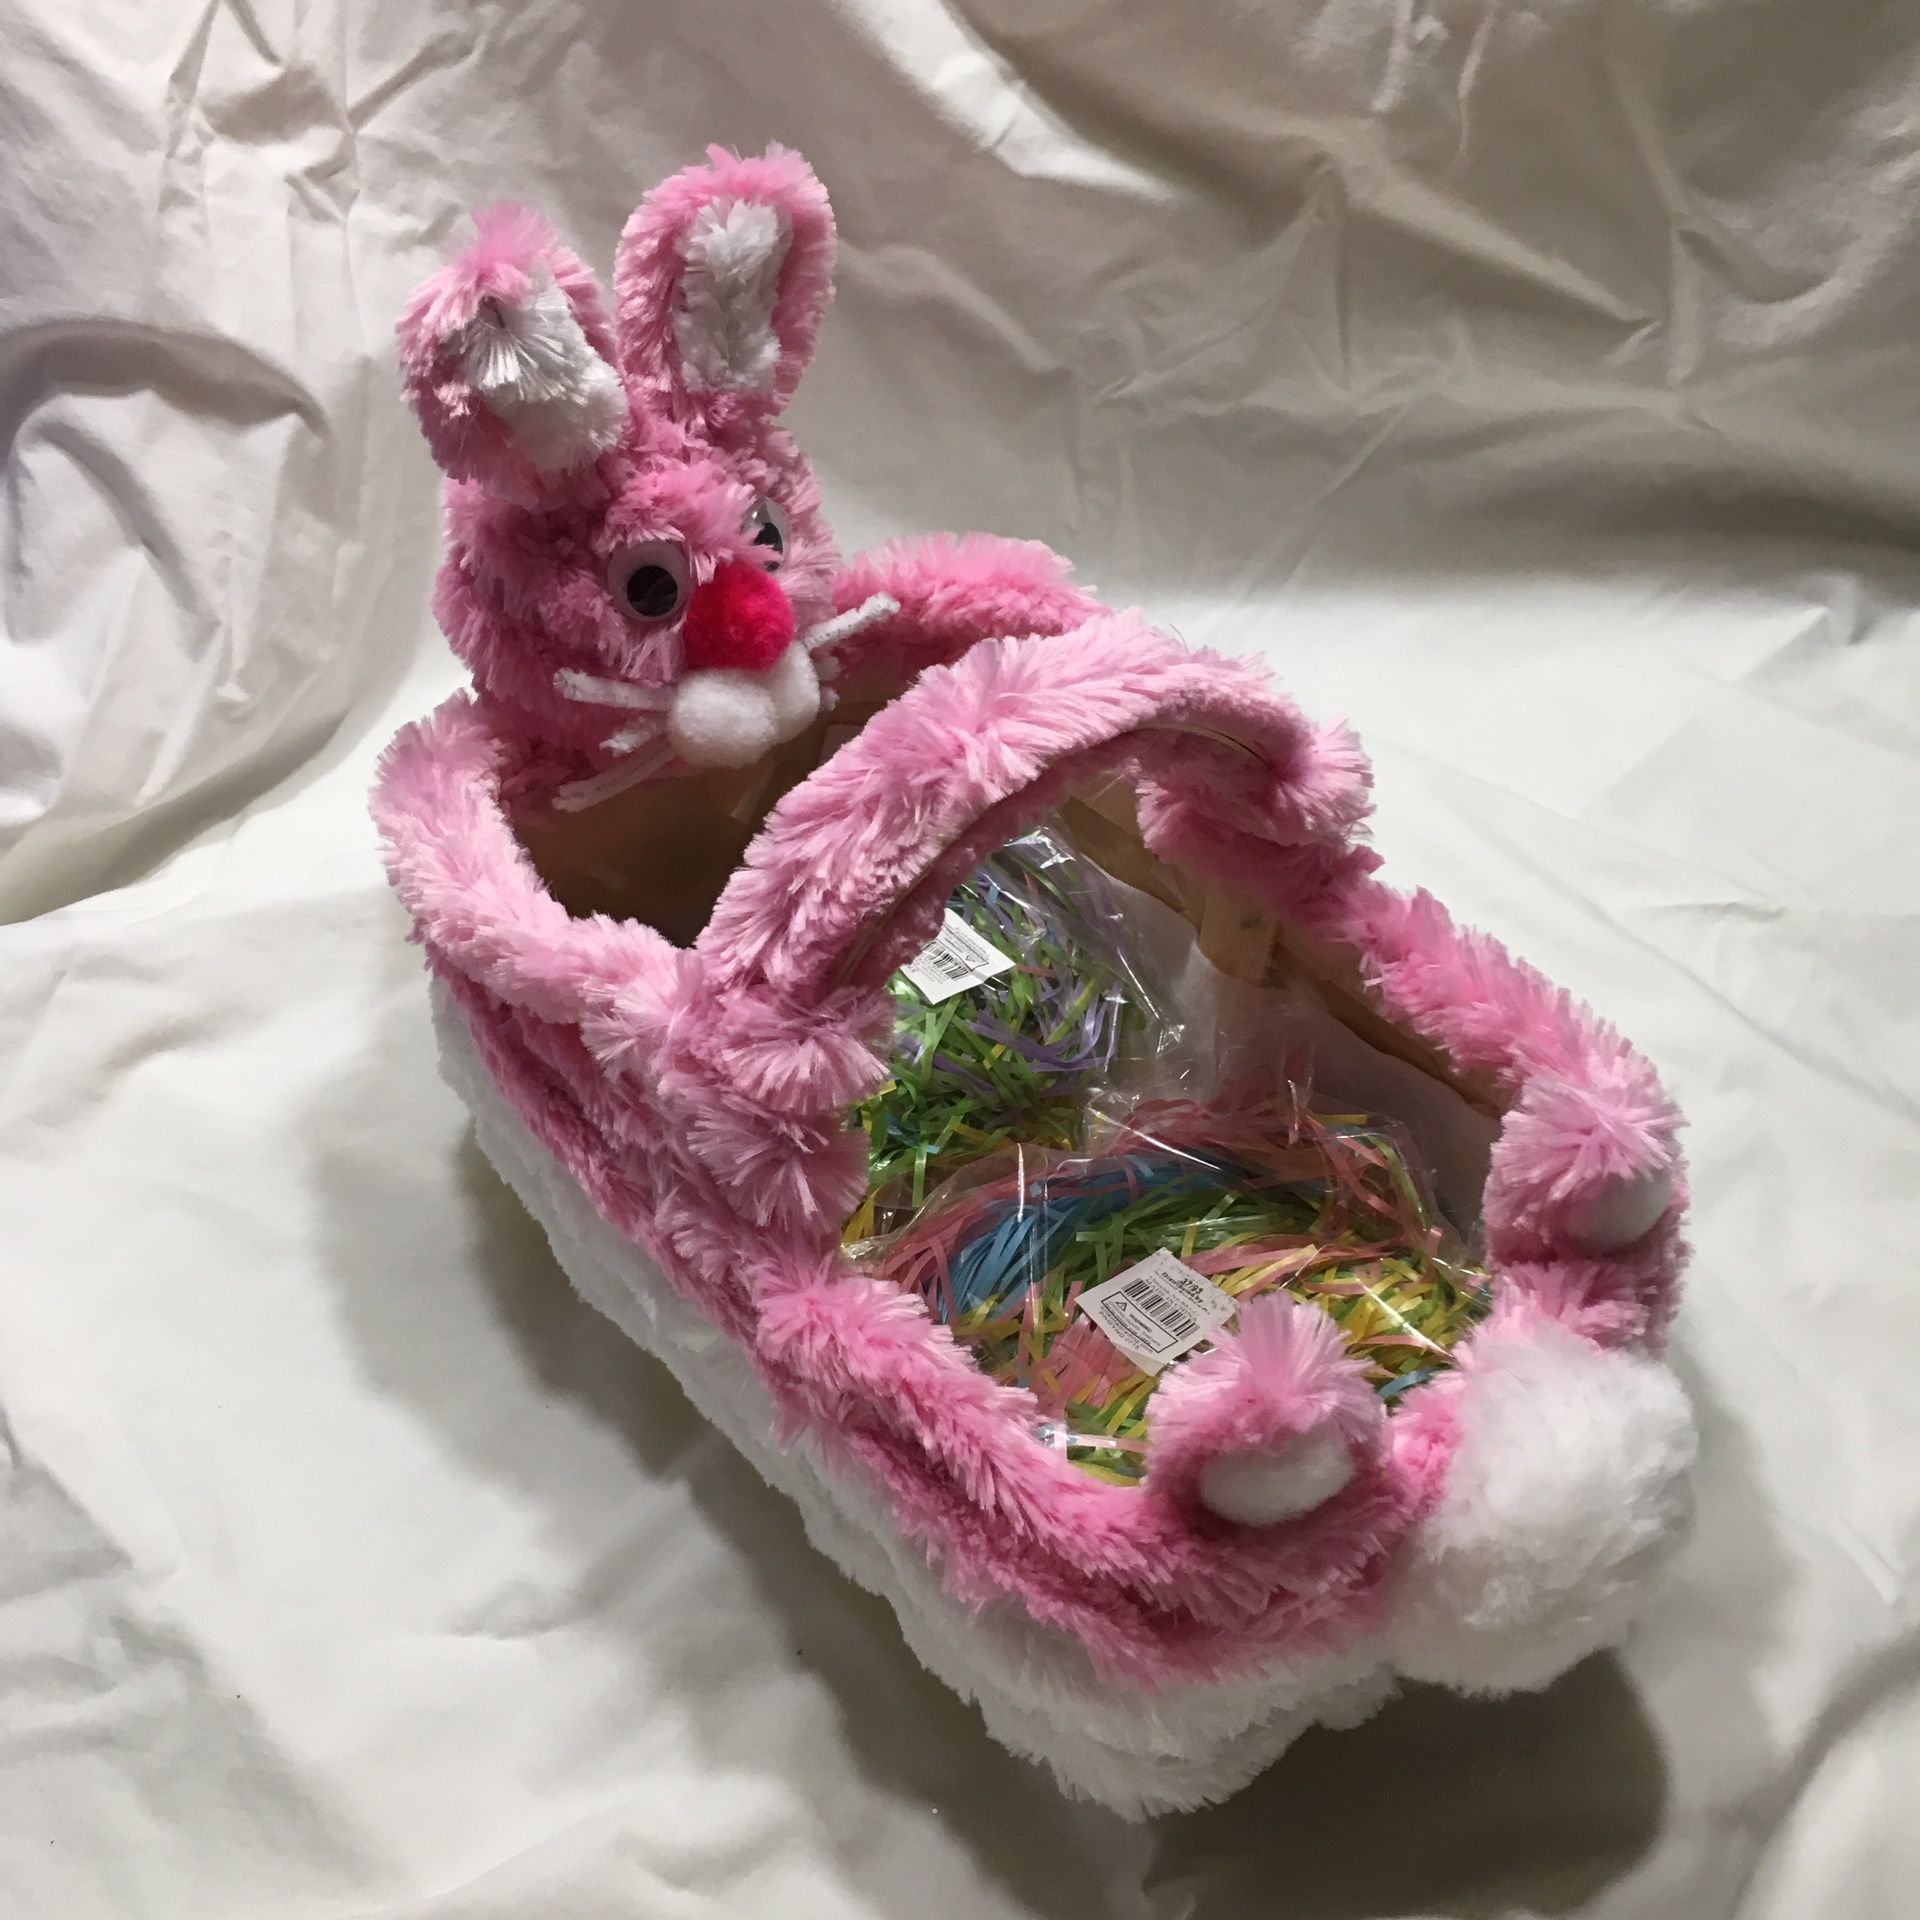 Handmade Easter Bunny Baskets, comes with Easter grass,